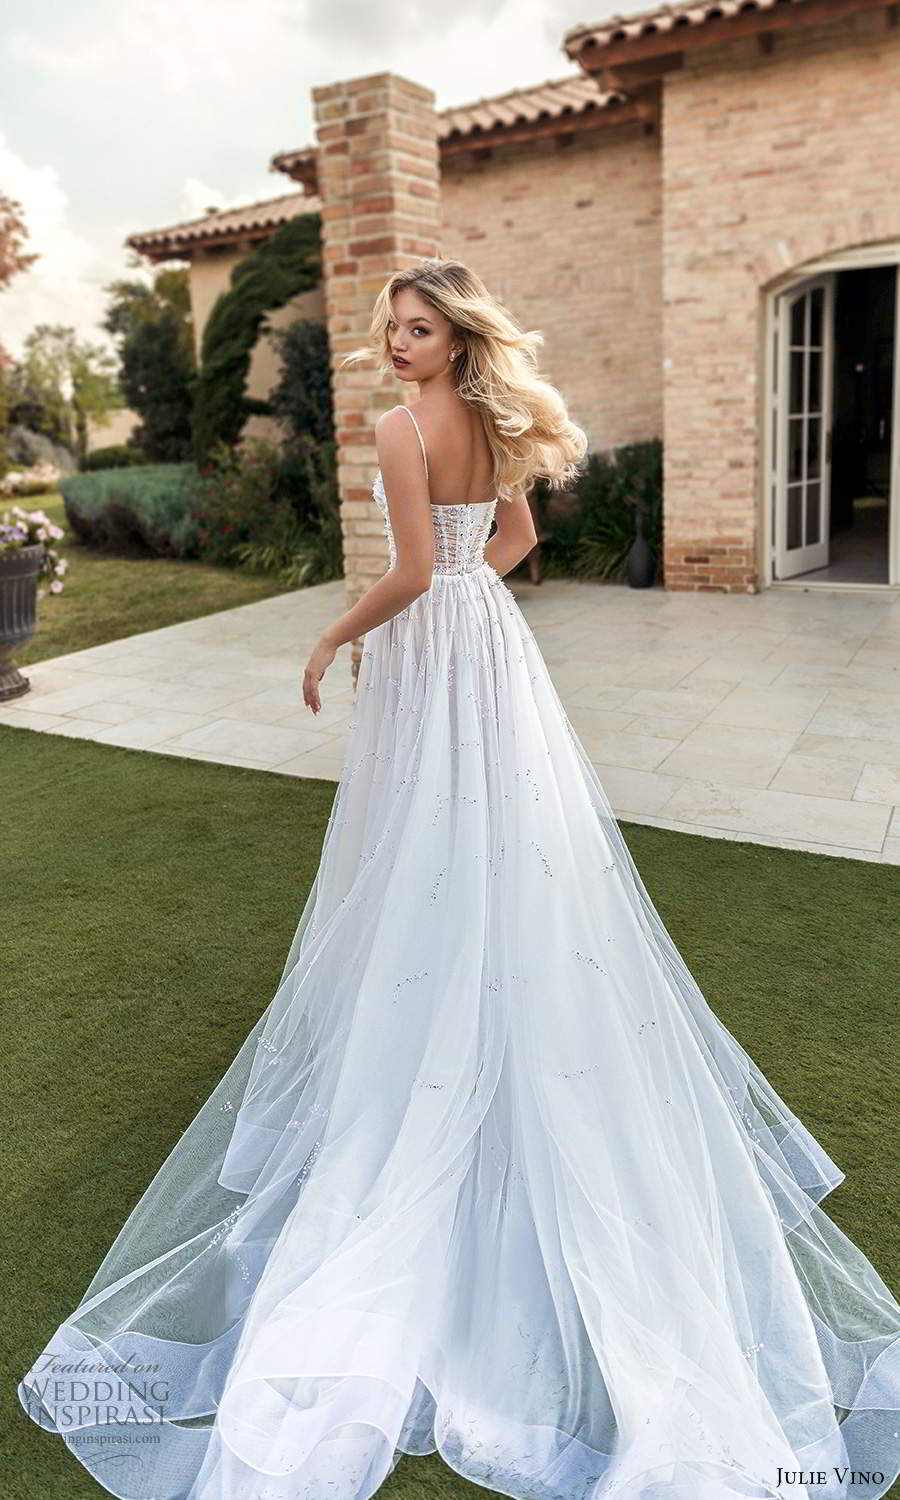 julie vino 2021 romanzo bridal sleeveless beaded straps sweetheart neckline ruched bodice fully embellished a line ball gown wedding dress chapel train (9) bv